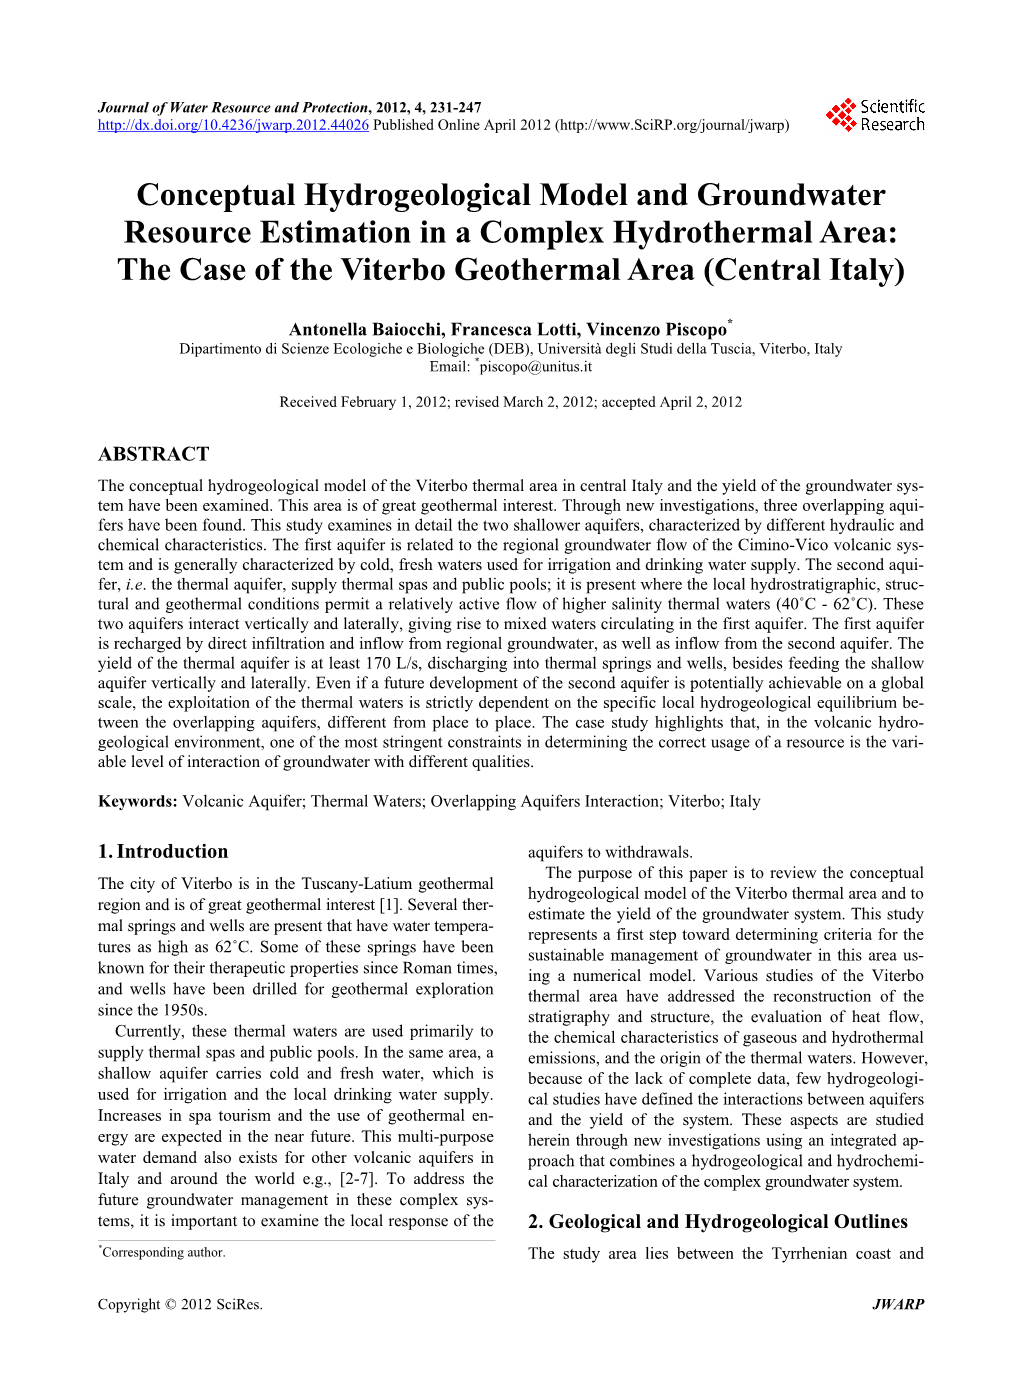 Conceptual Hydrogeological Model and Groundwater Resource Estimation in a Complex Hydrothermal Area: the Case of the Viterbo Geothermal Area (Central Italy)